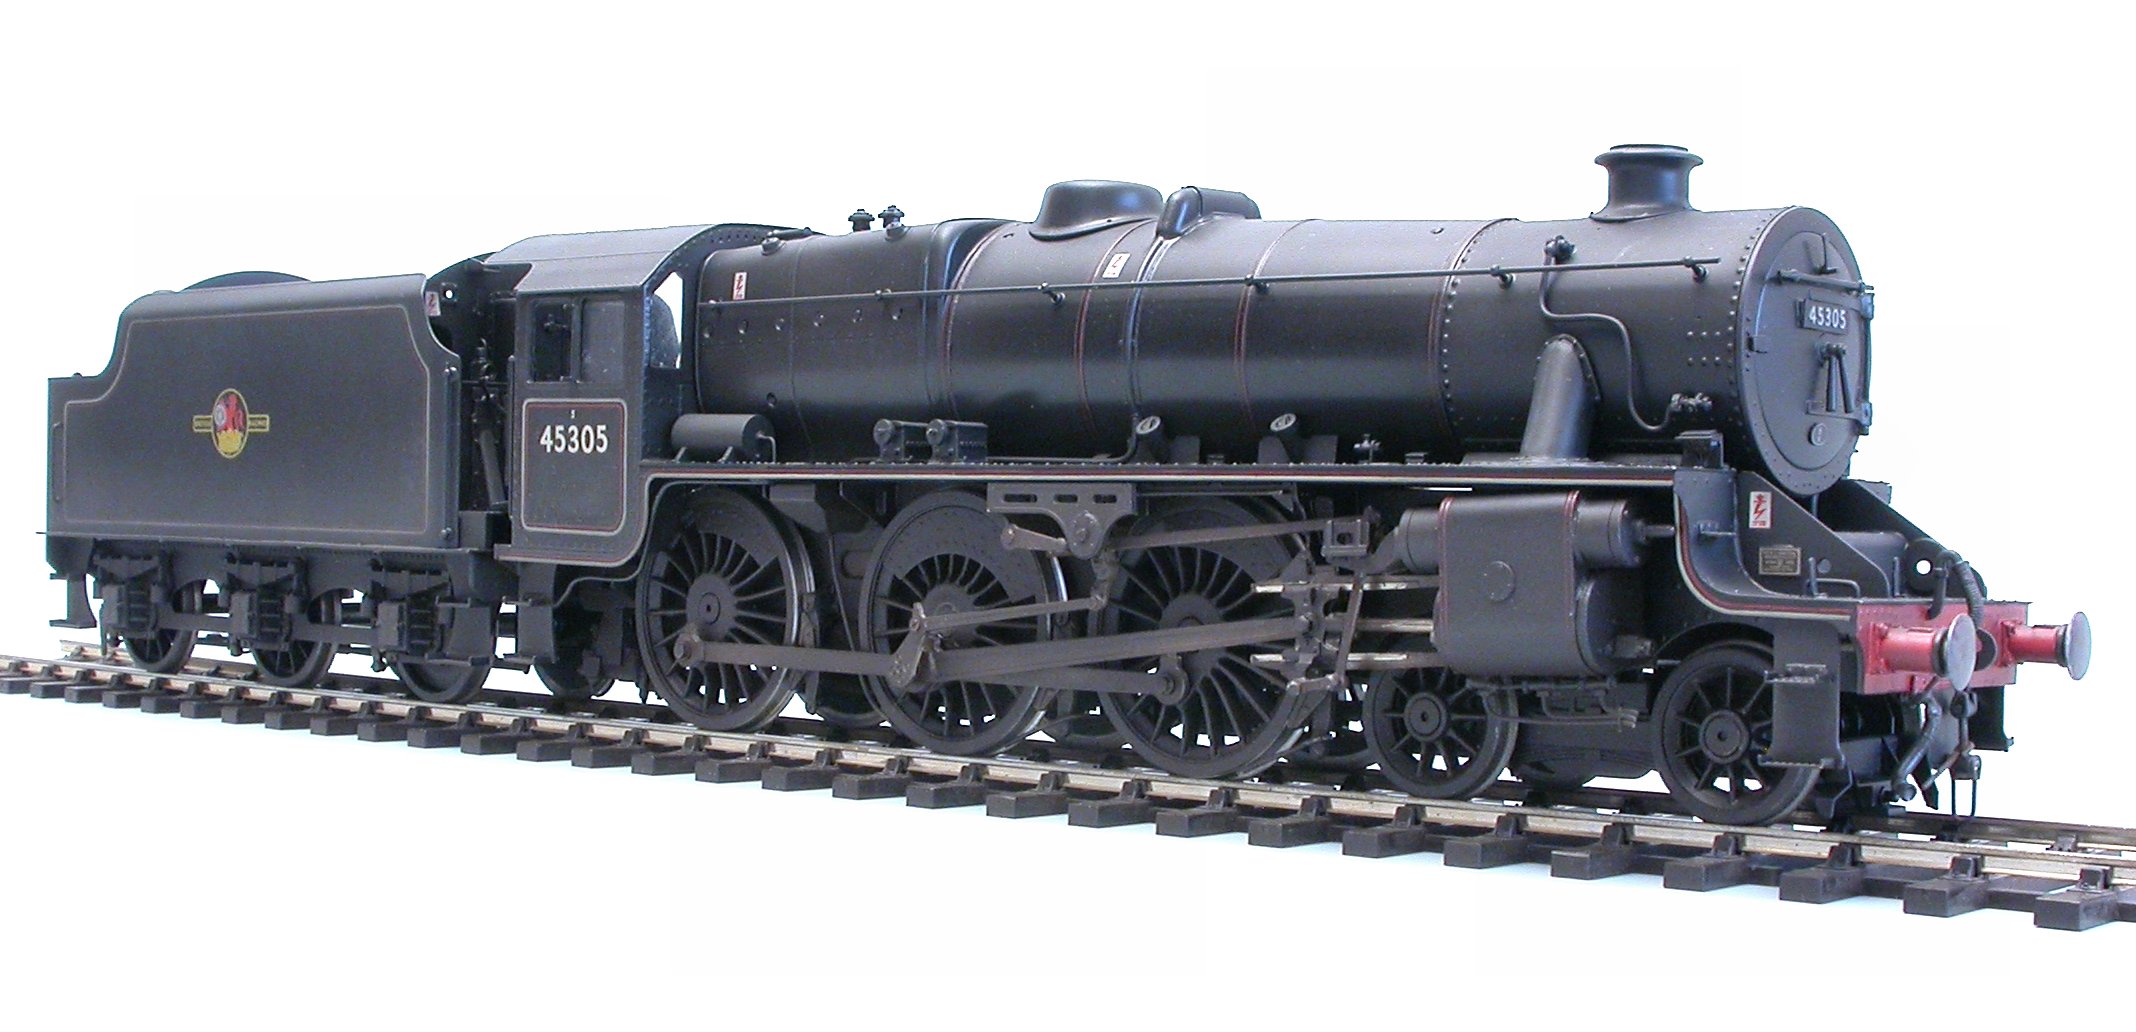 Built and painted example of a Black 5.